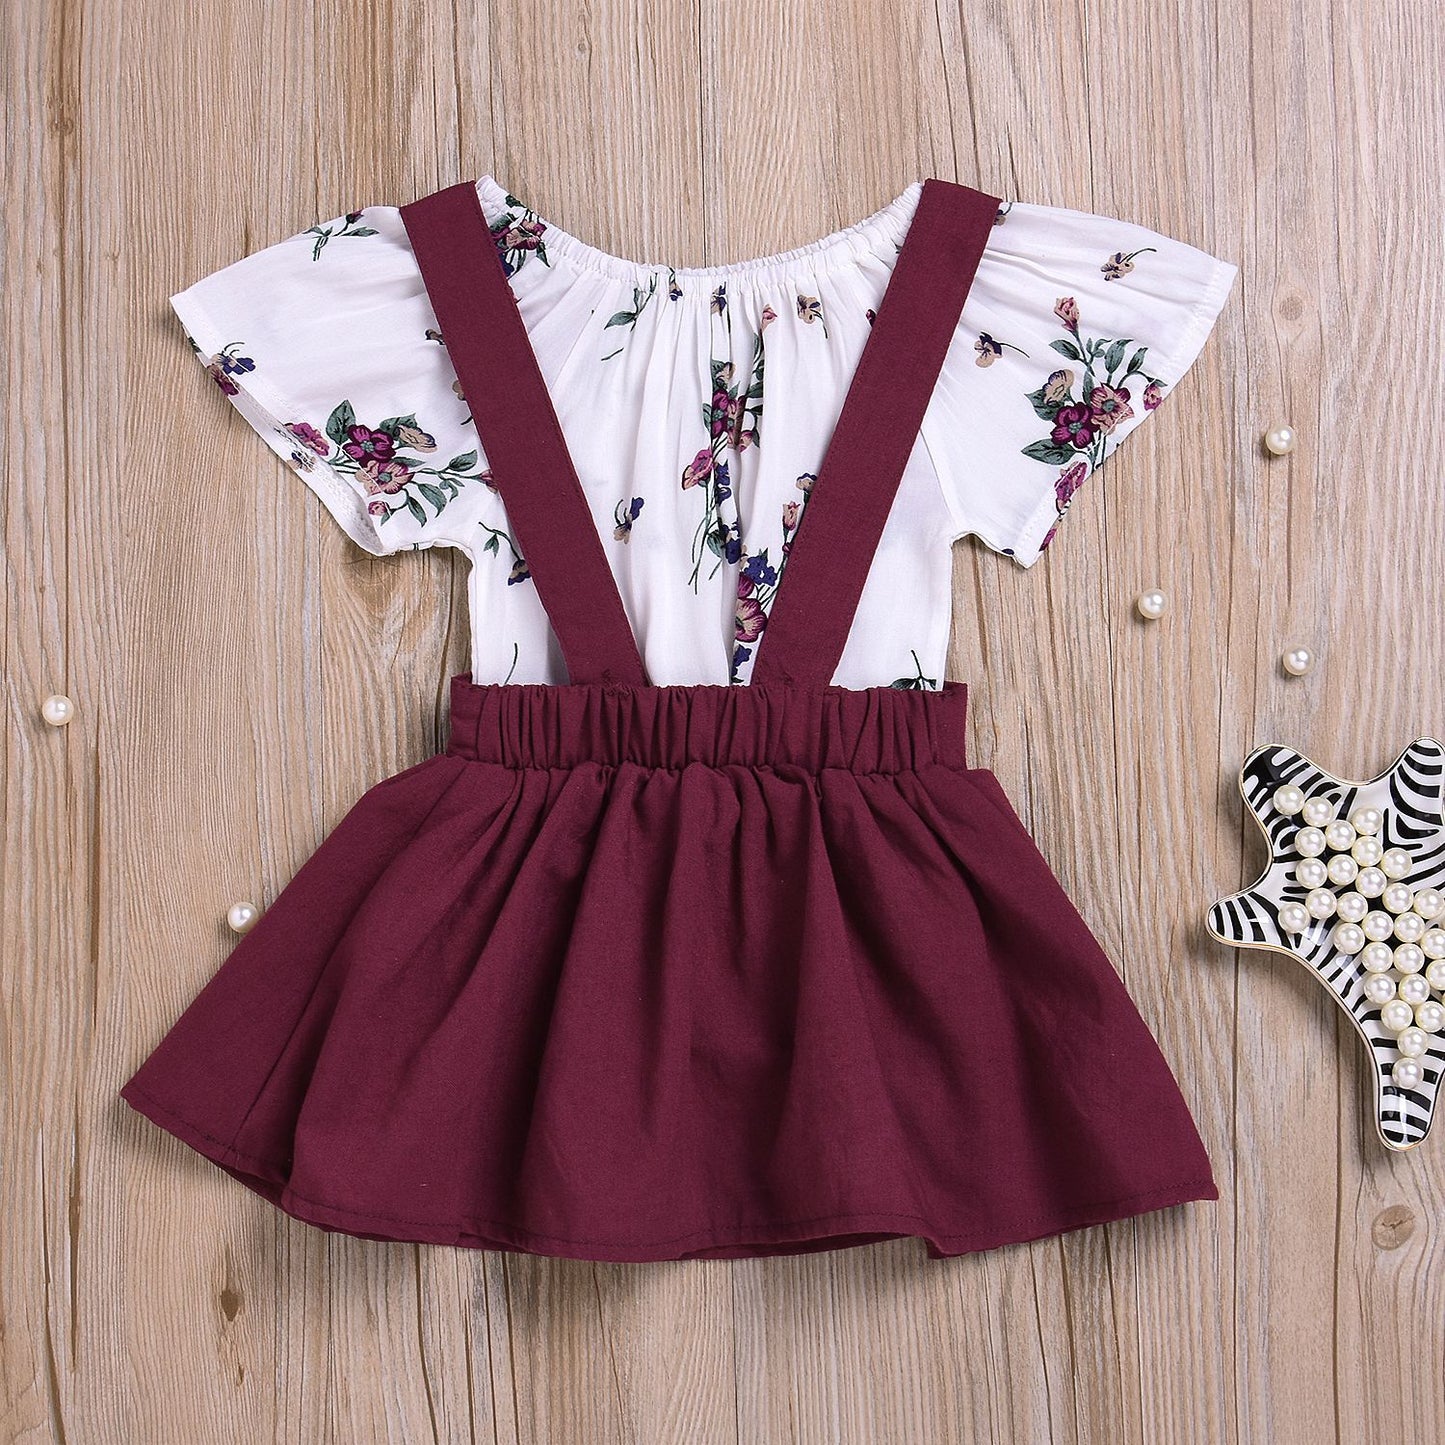 Blooming Beauty: Floral Ensemble for Toddler Baby Girls (Available in Four Sizes)